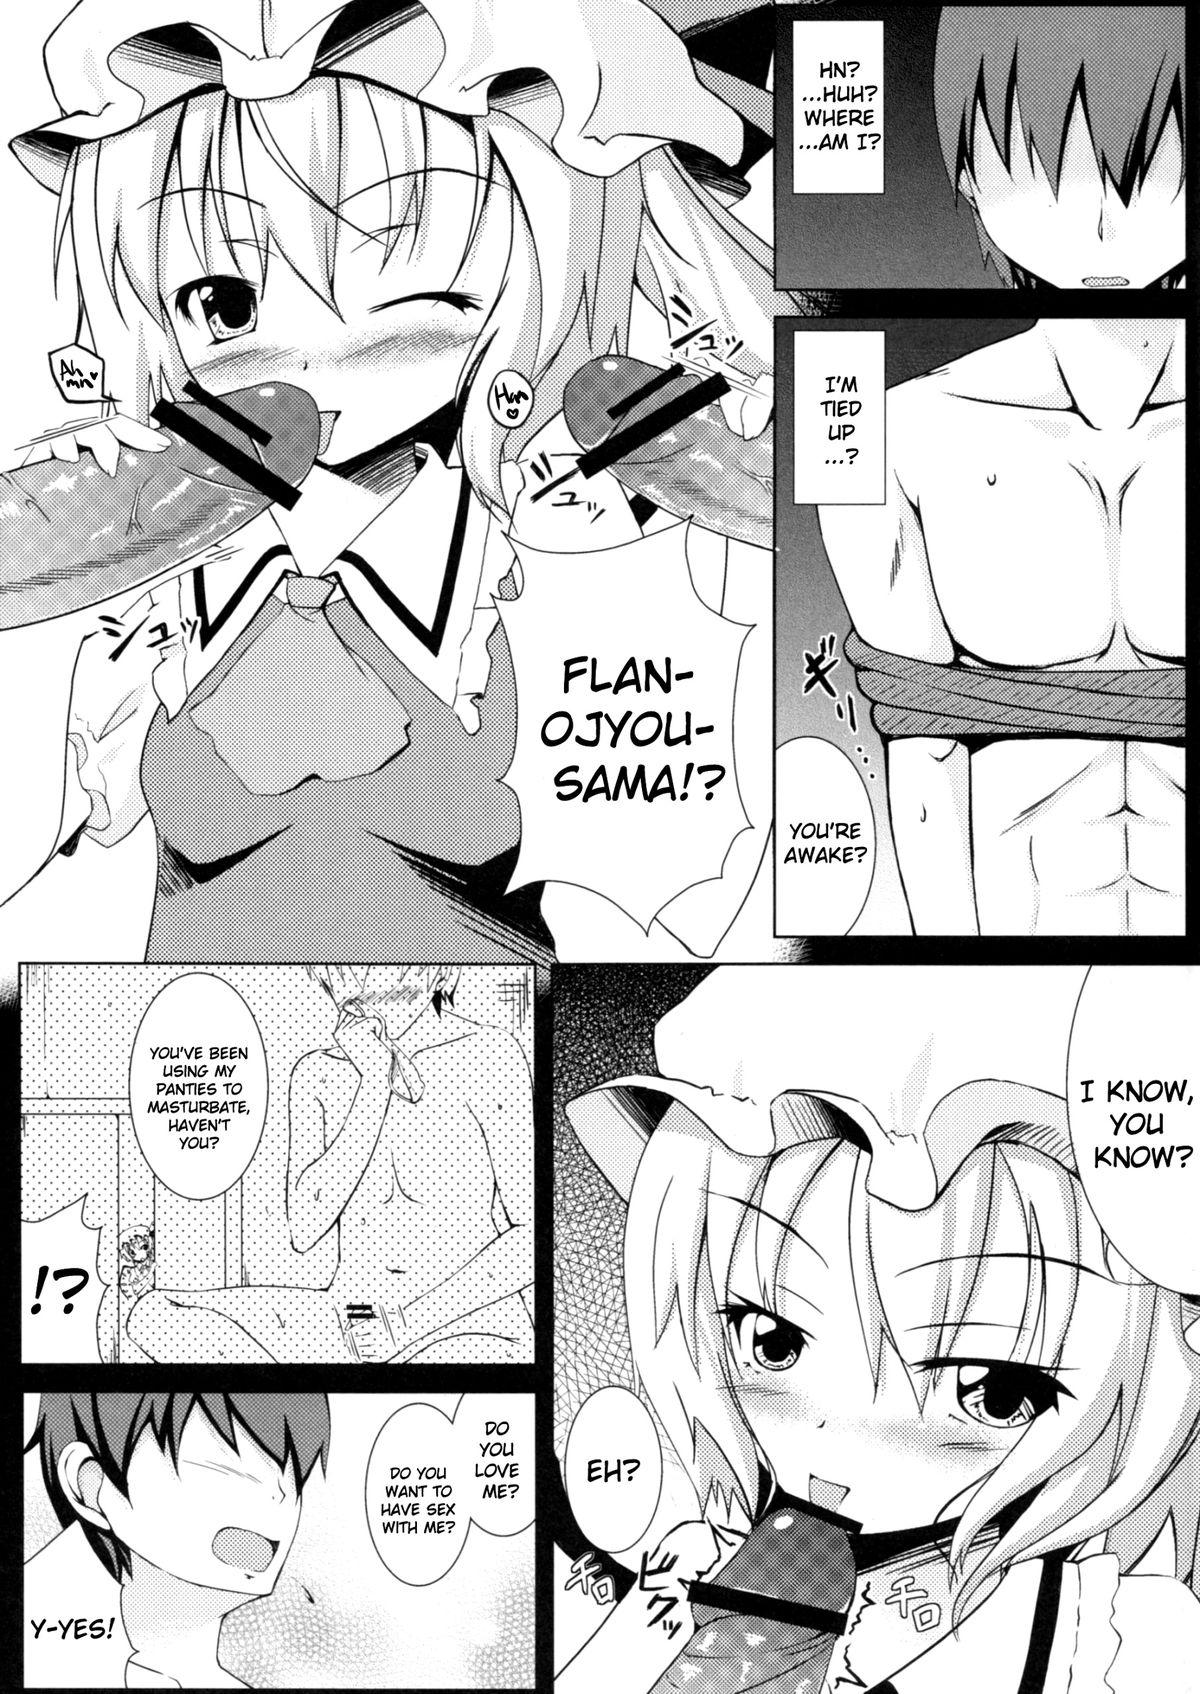 Eurosex NTR Flan-chan - Touhou project Licking Pussy - Page 2